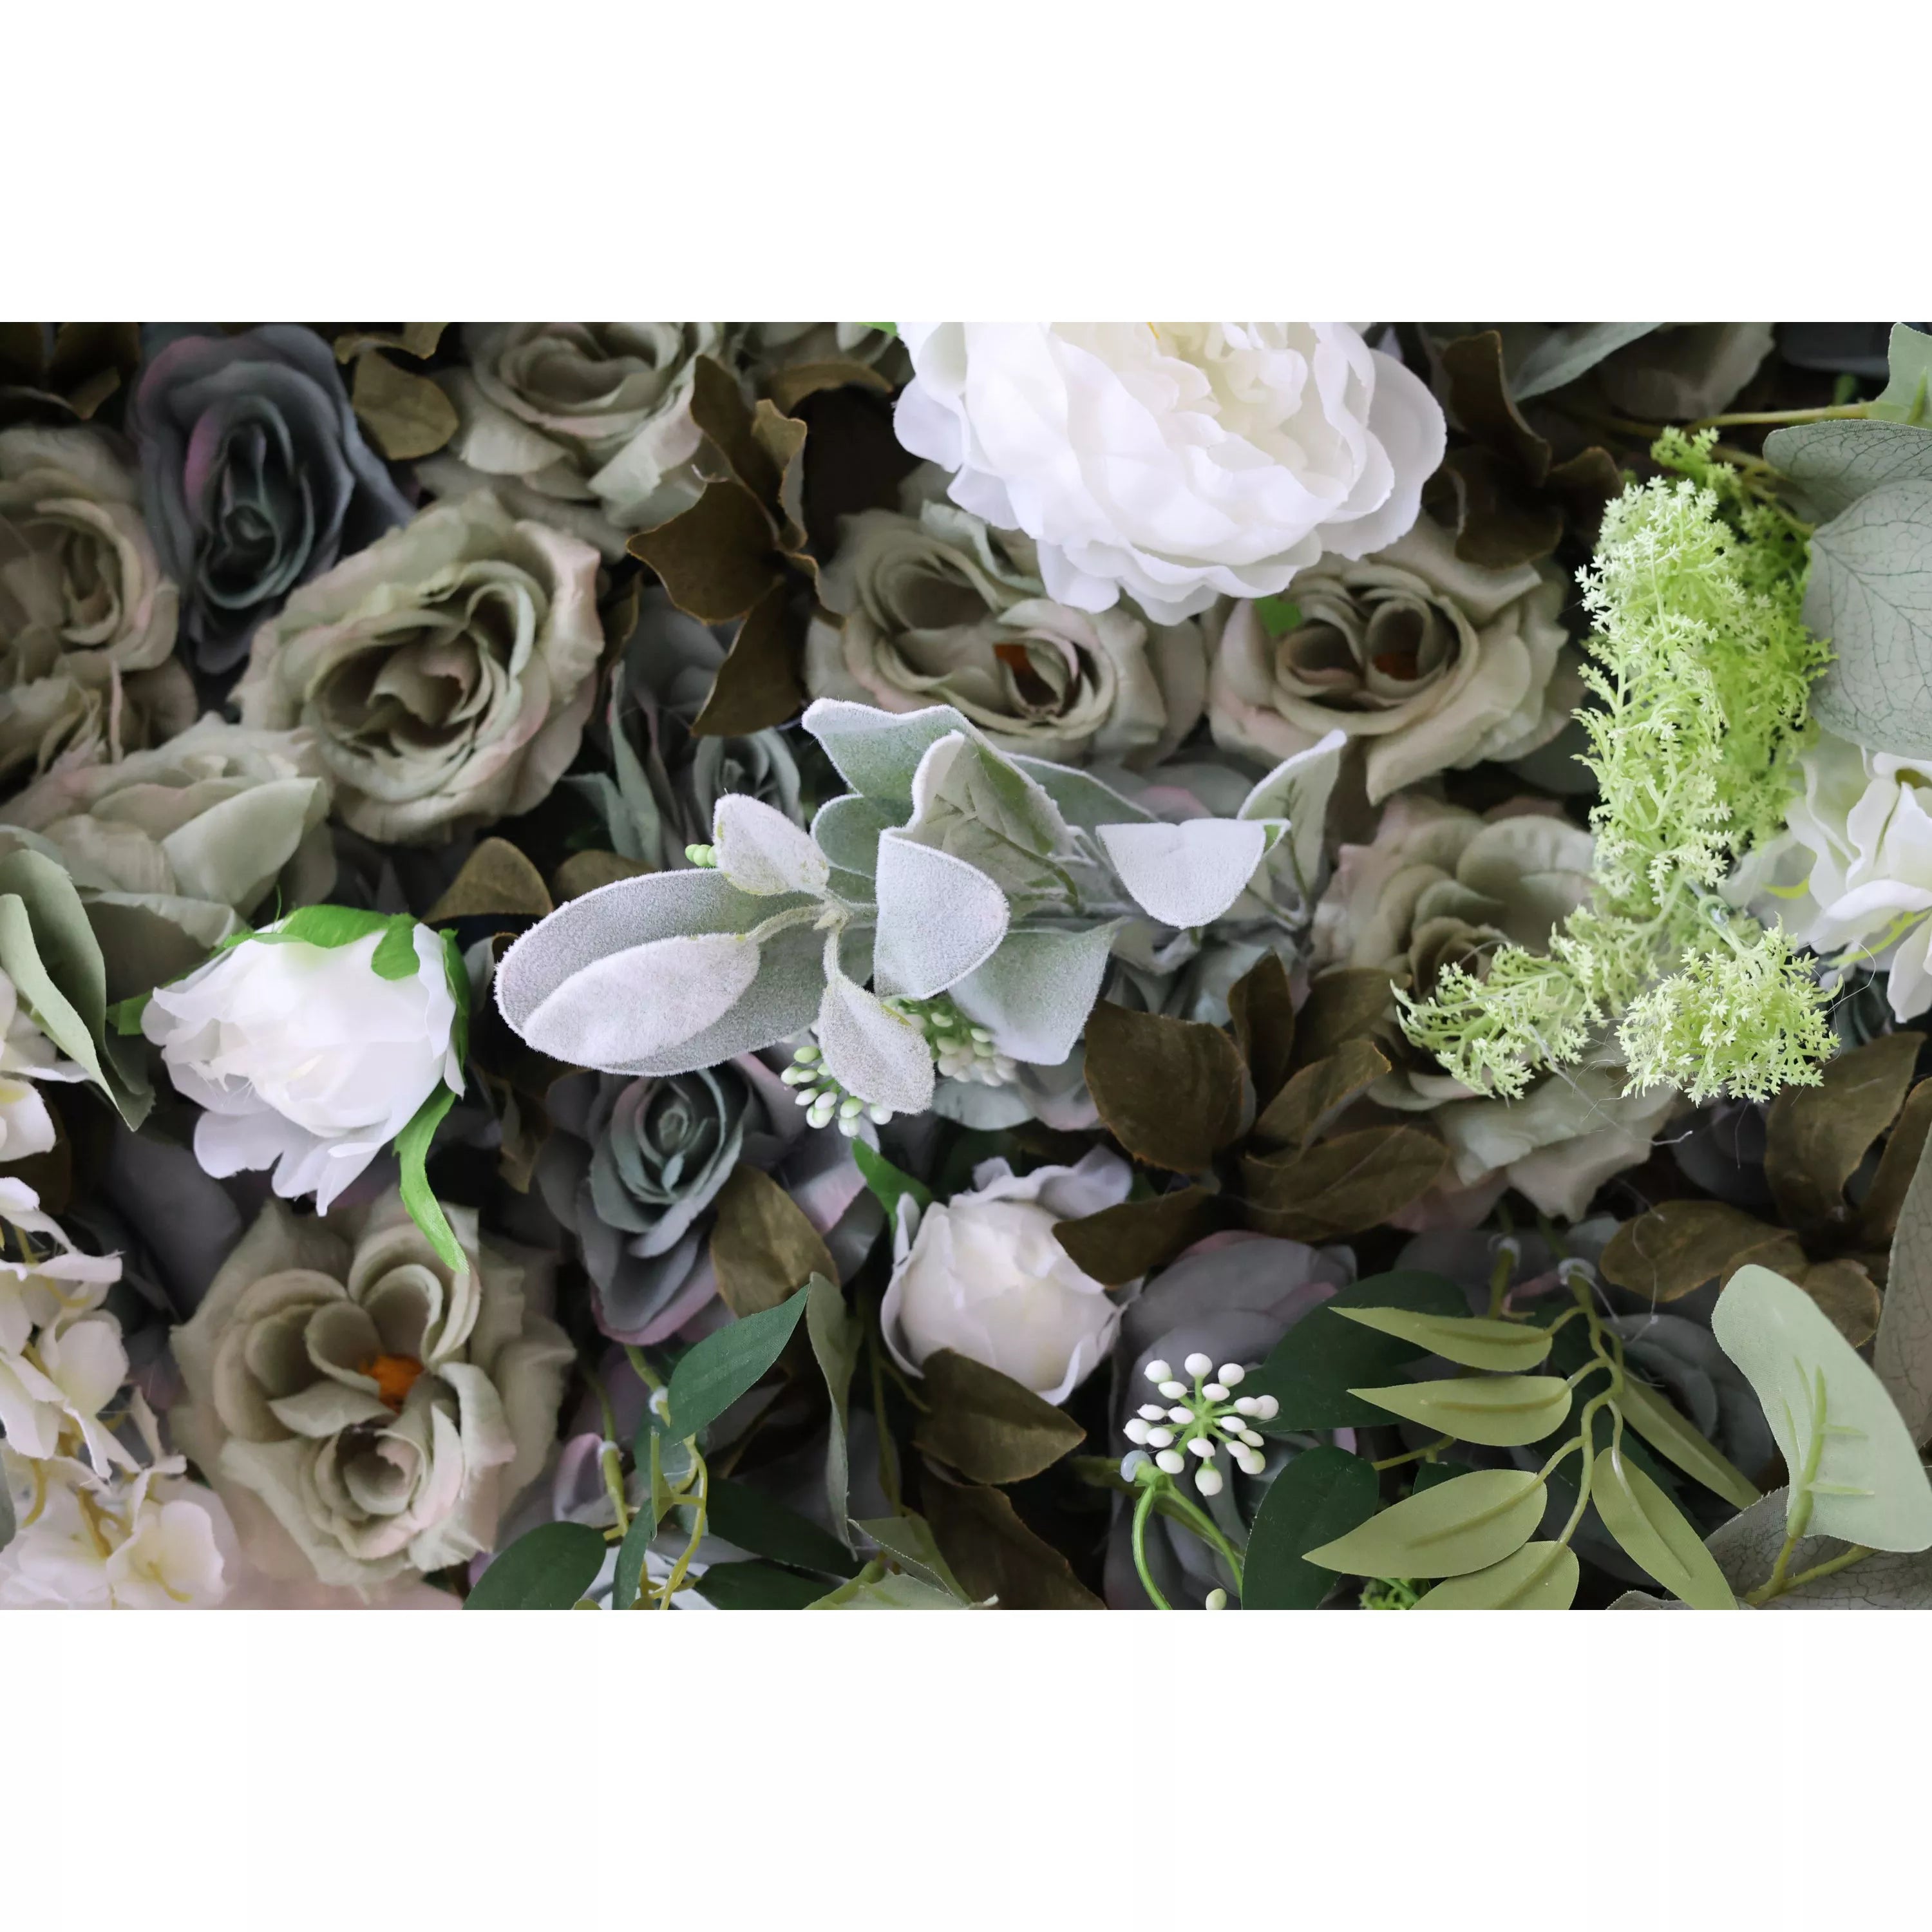 Valar Flowers Introduces: Verdant Elysium – A Lush Blend of Green Foliage & Cascading White Blossoms – The Quintessential Nature-Inspired Wall for Garden Parties, Eco-Themed Events & Green Interiors-VF-222-2